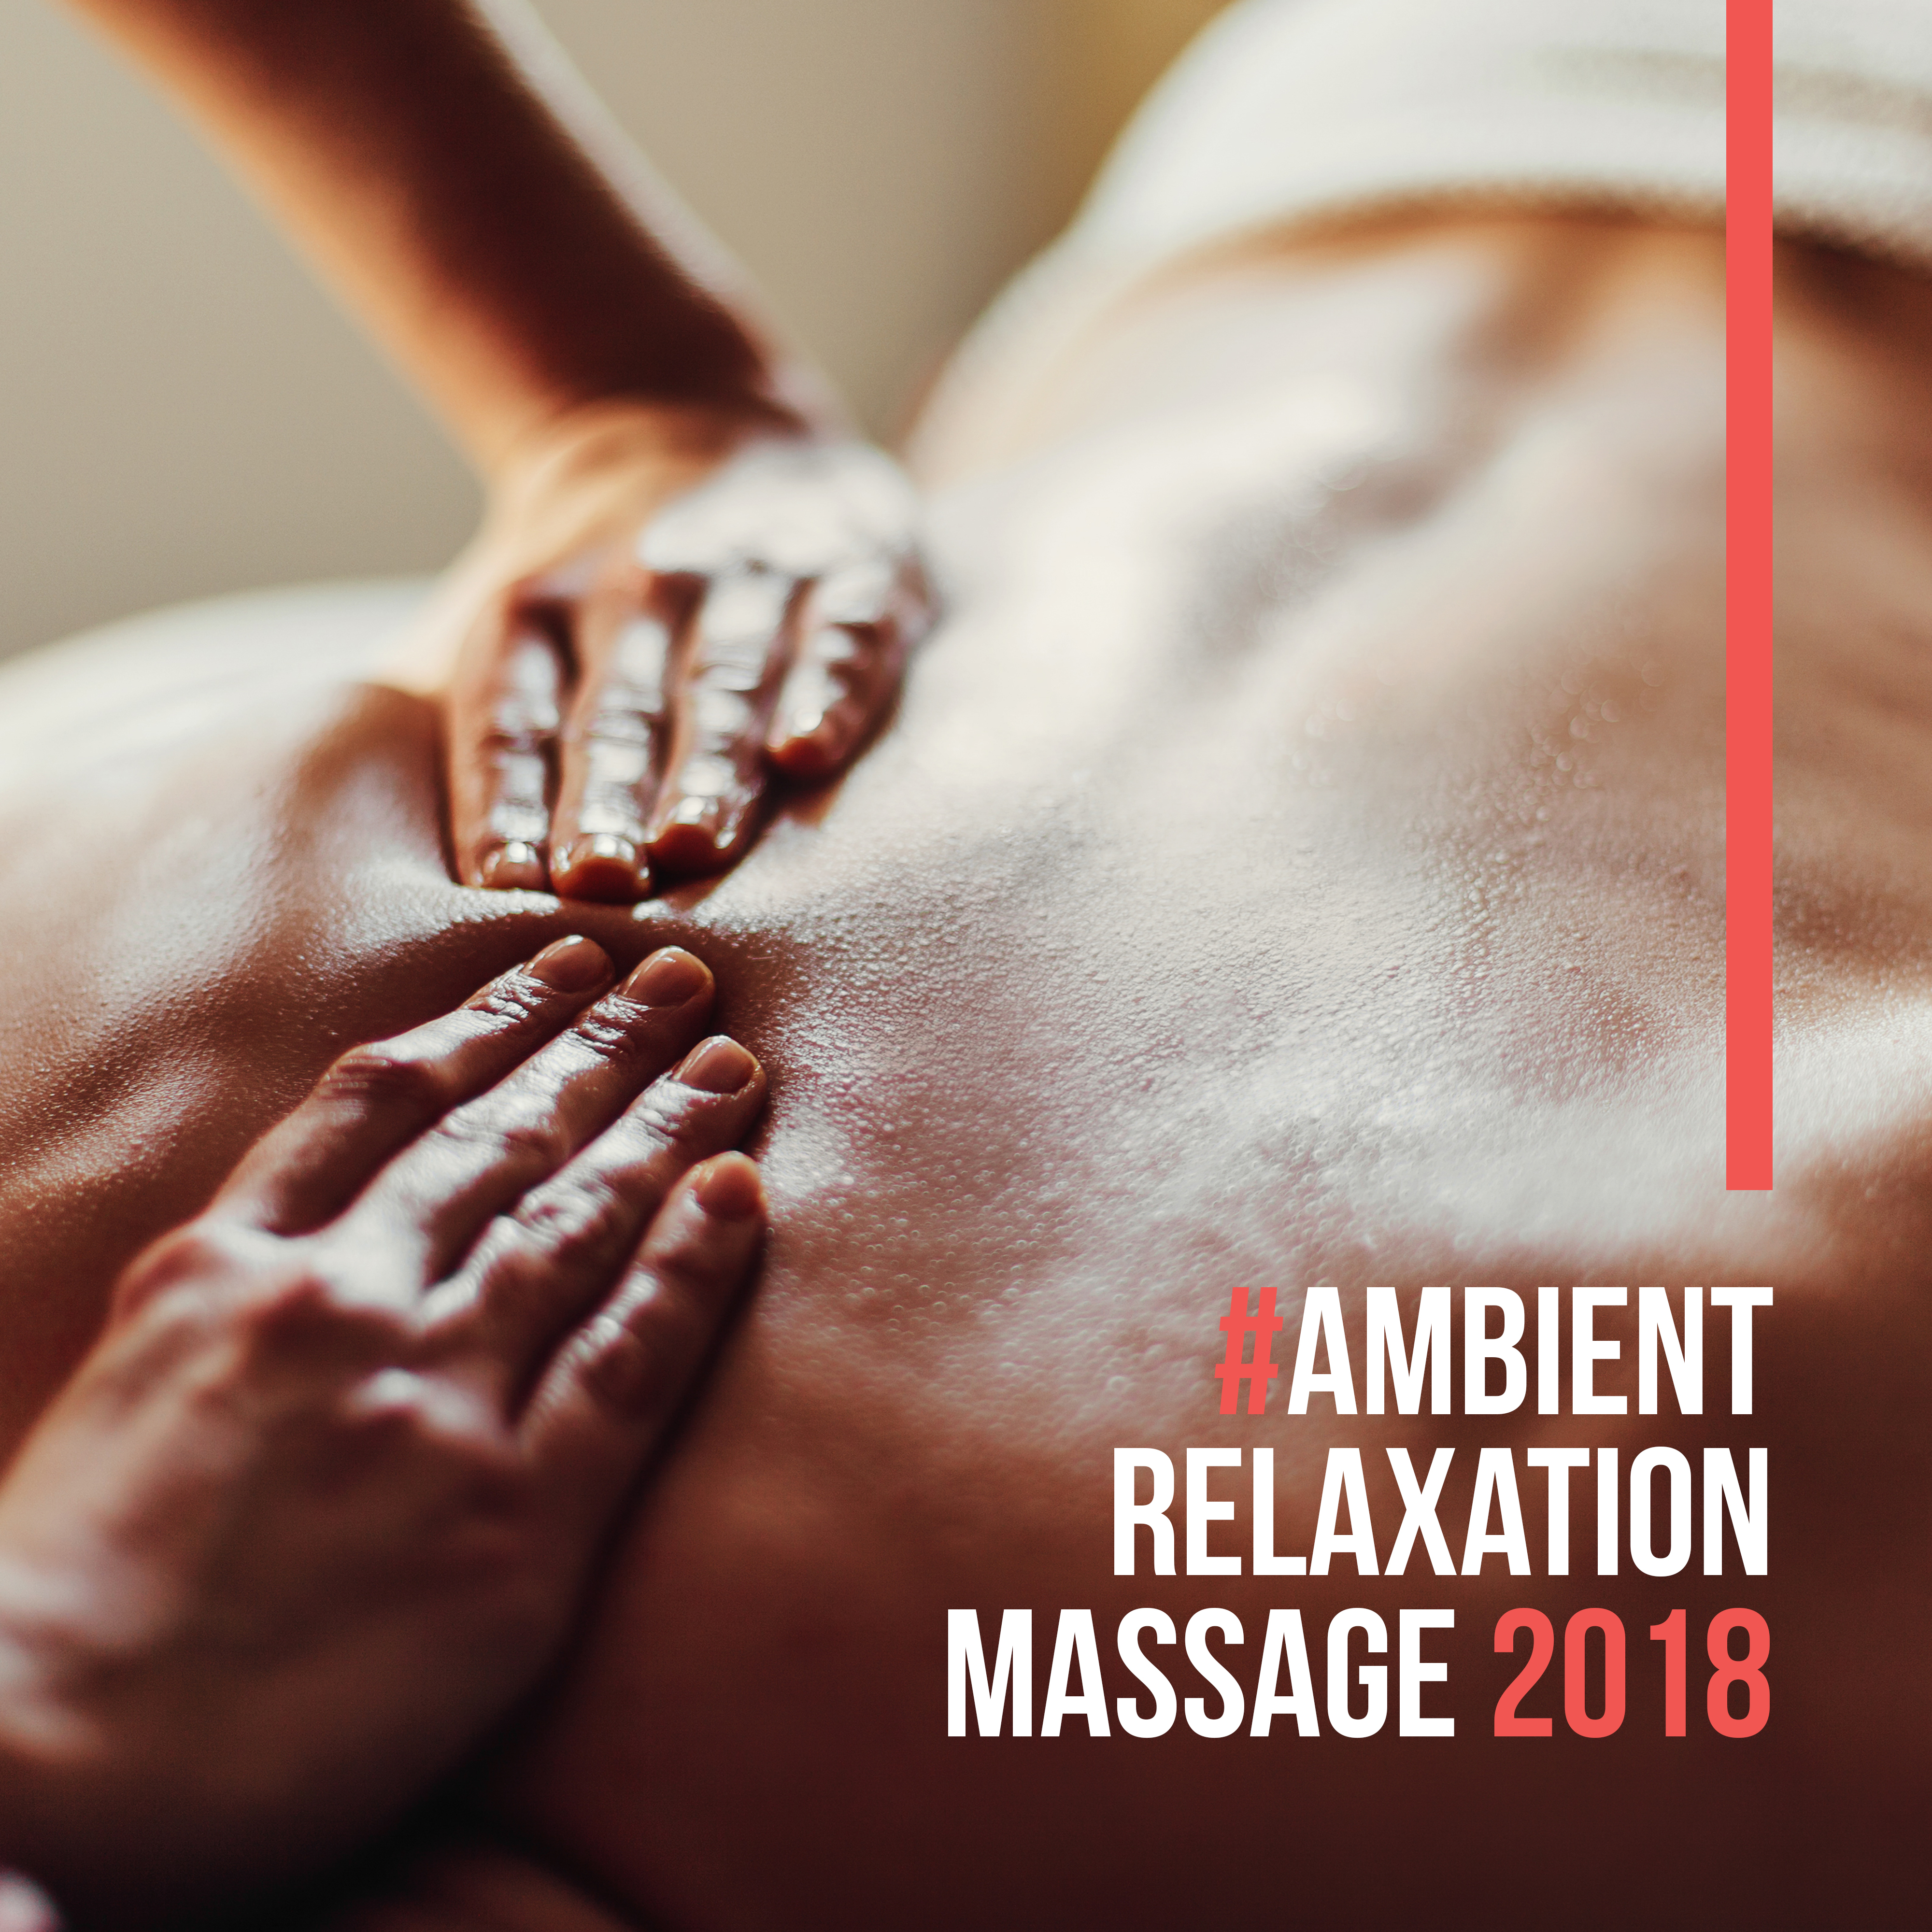 #Ambient Relaxation Massage 2018